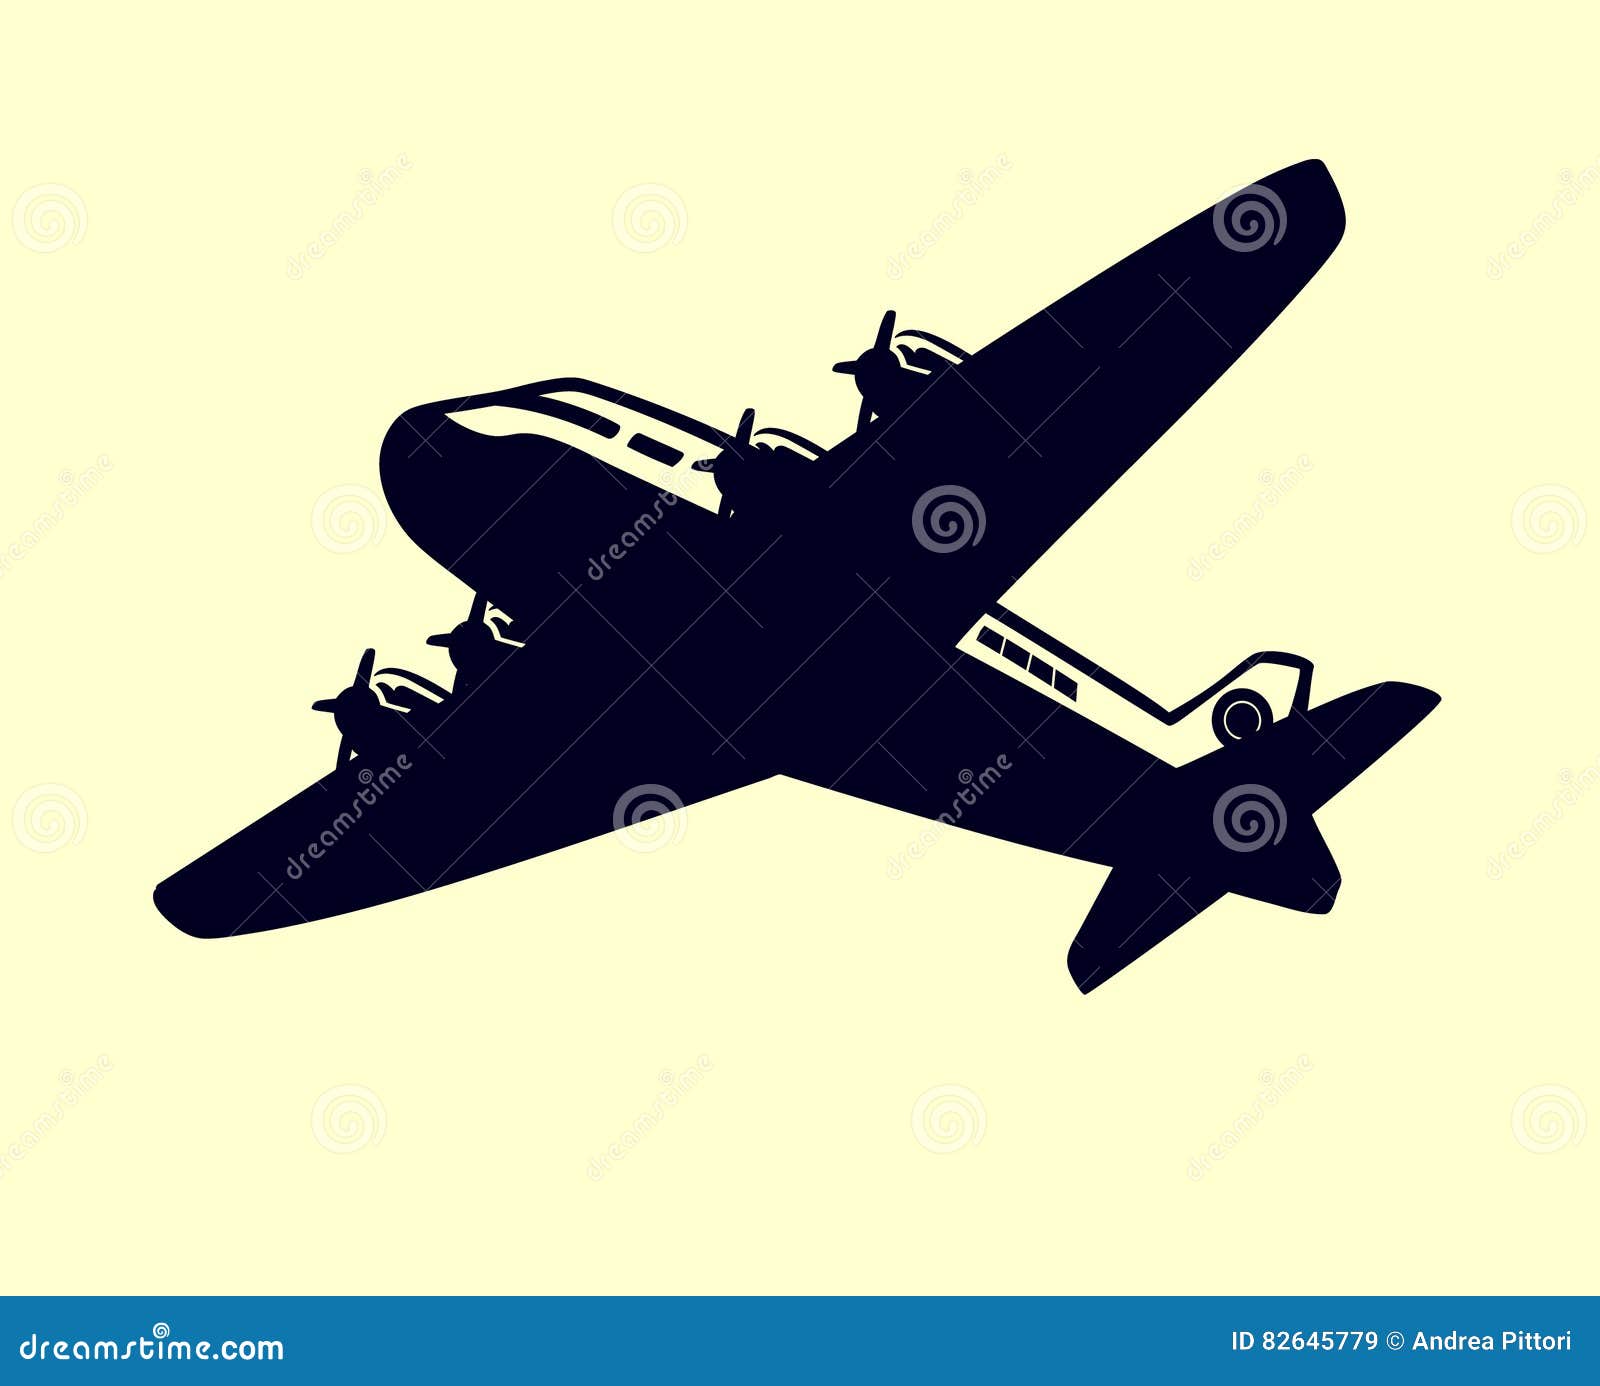 simple airplane with propellers black and white 